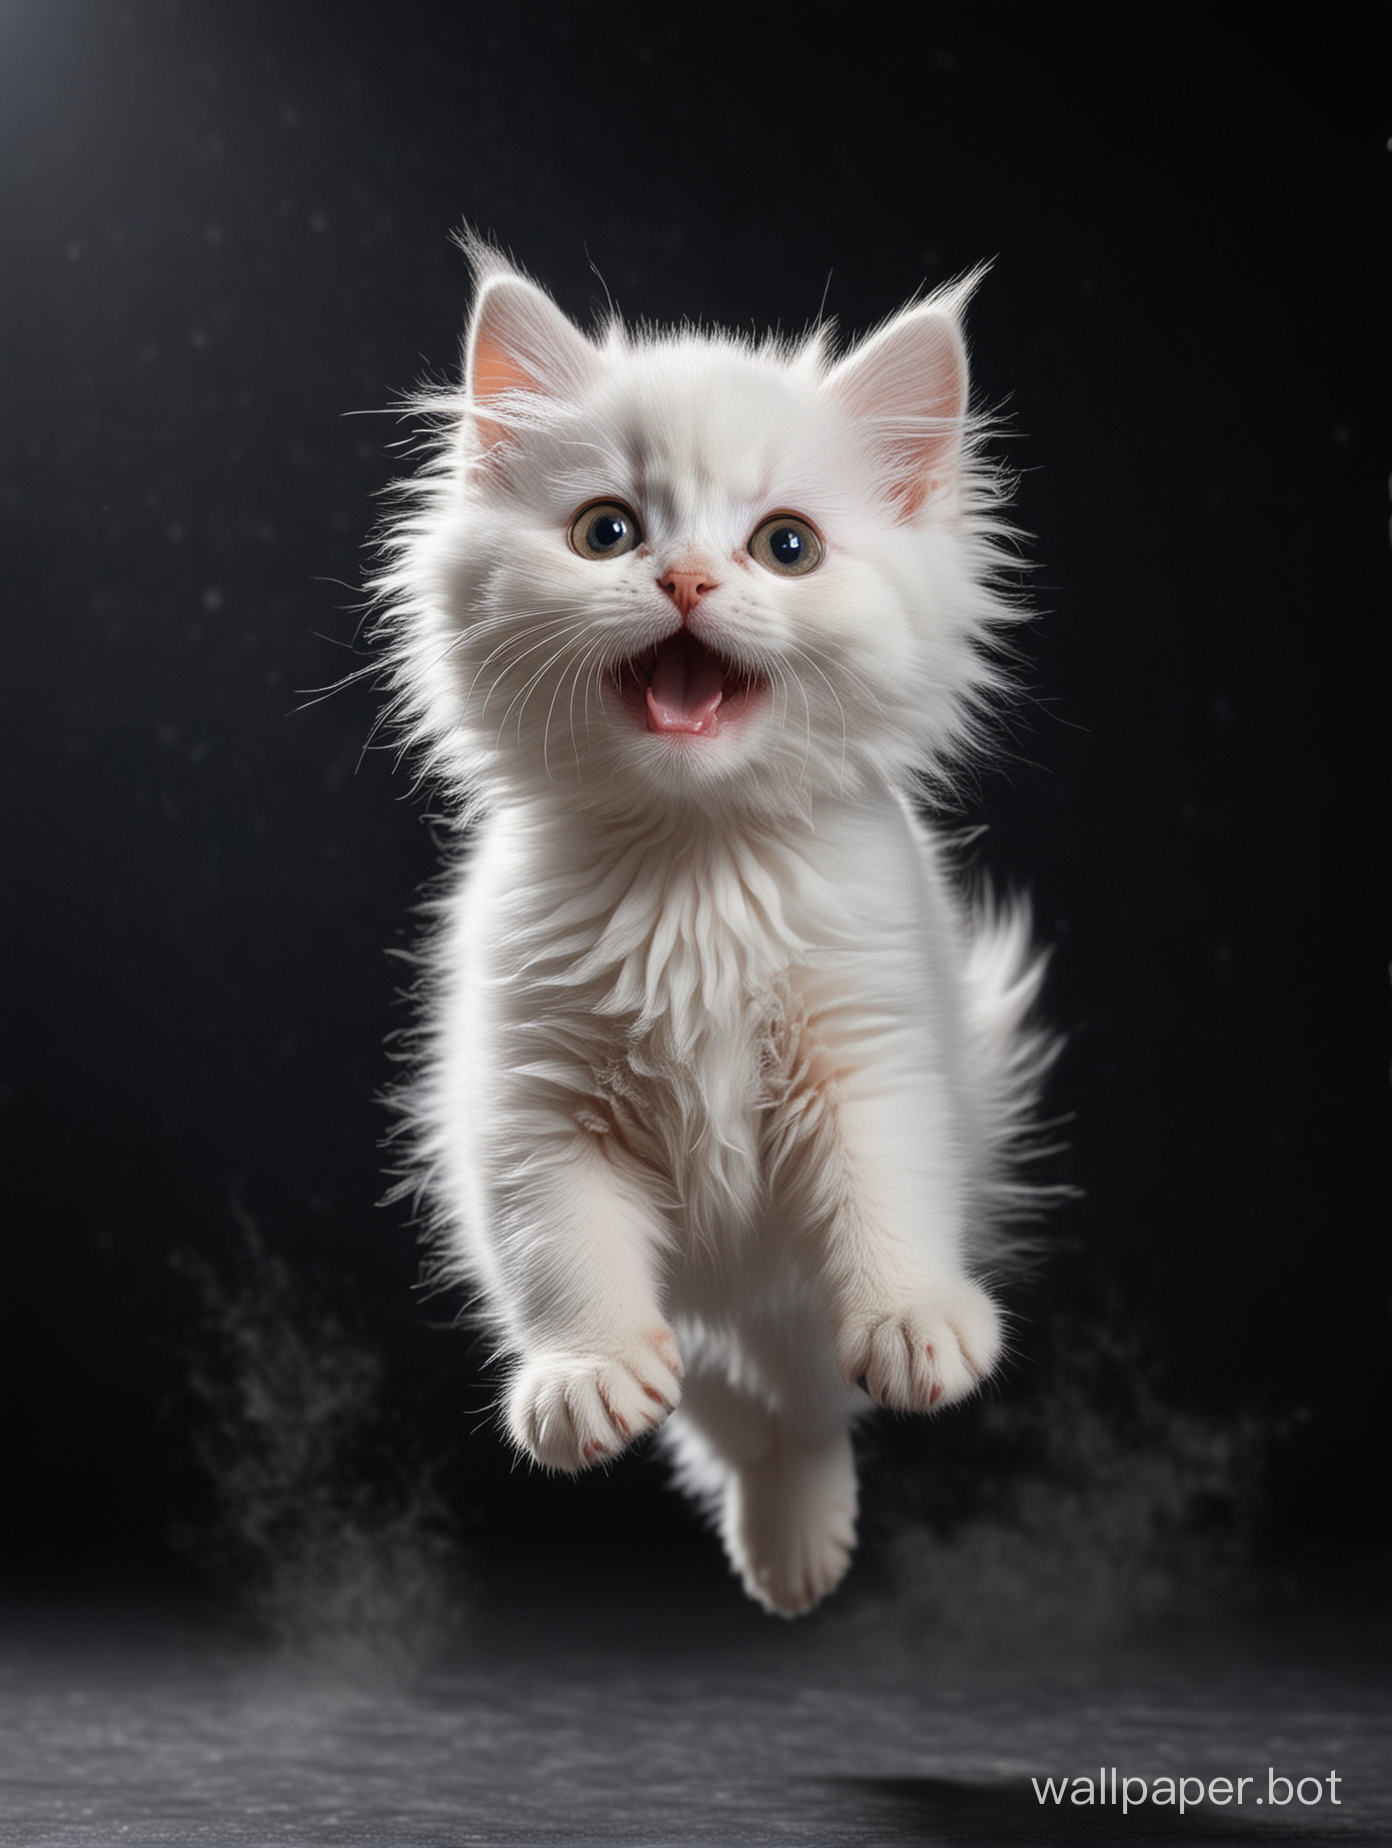 White Cute fluffy kitten with fluffy tale and big eyes jumping in pitch black space